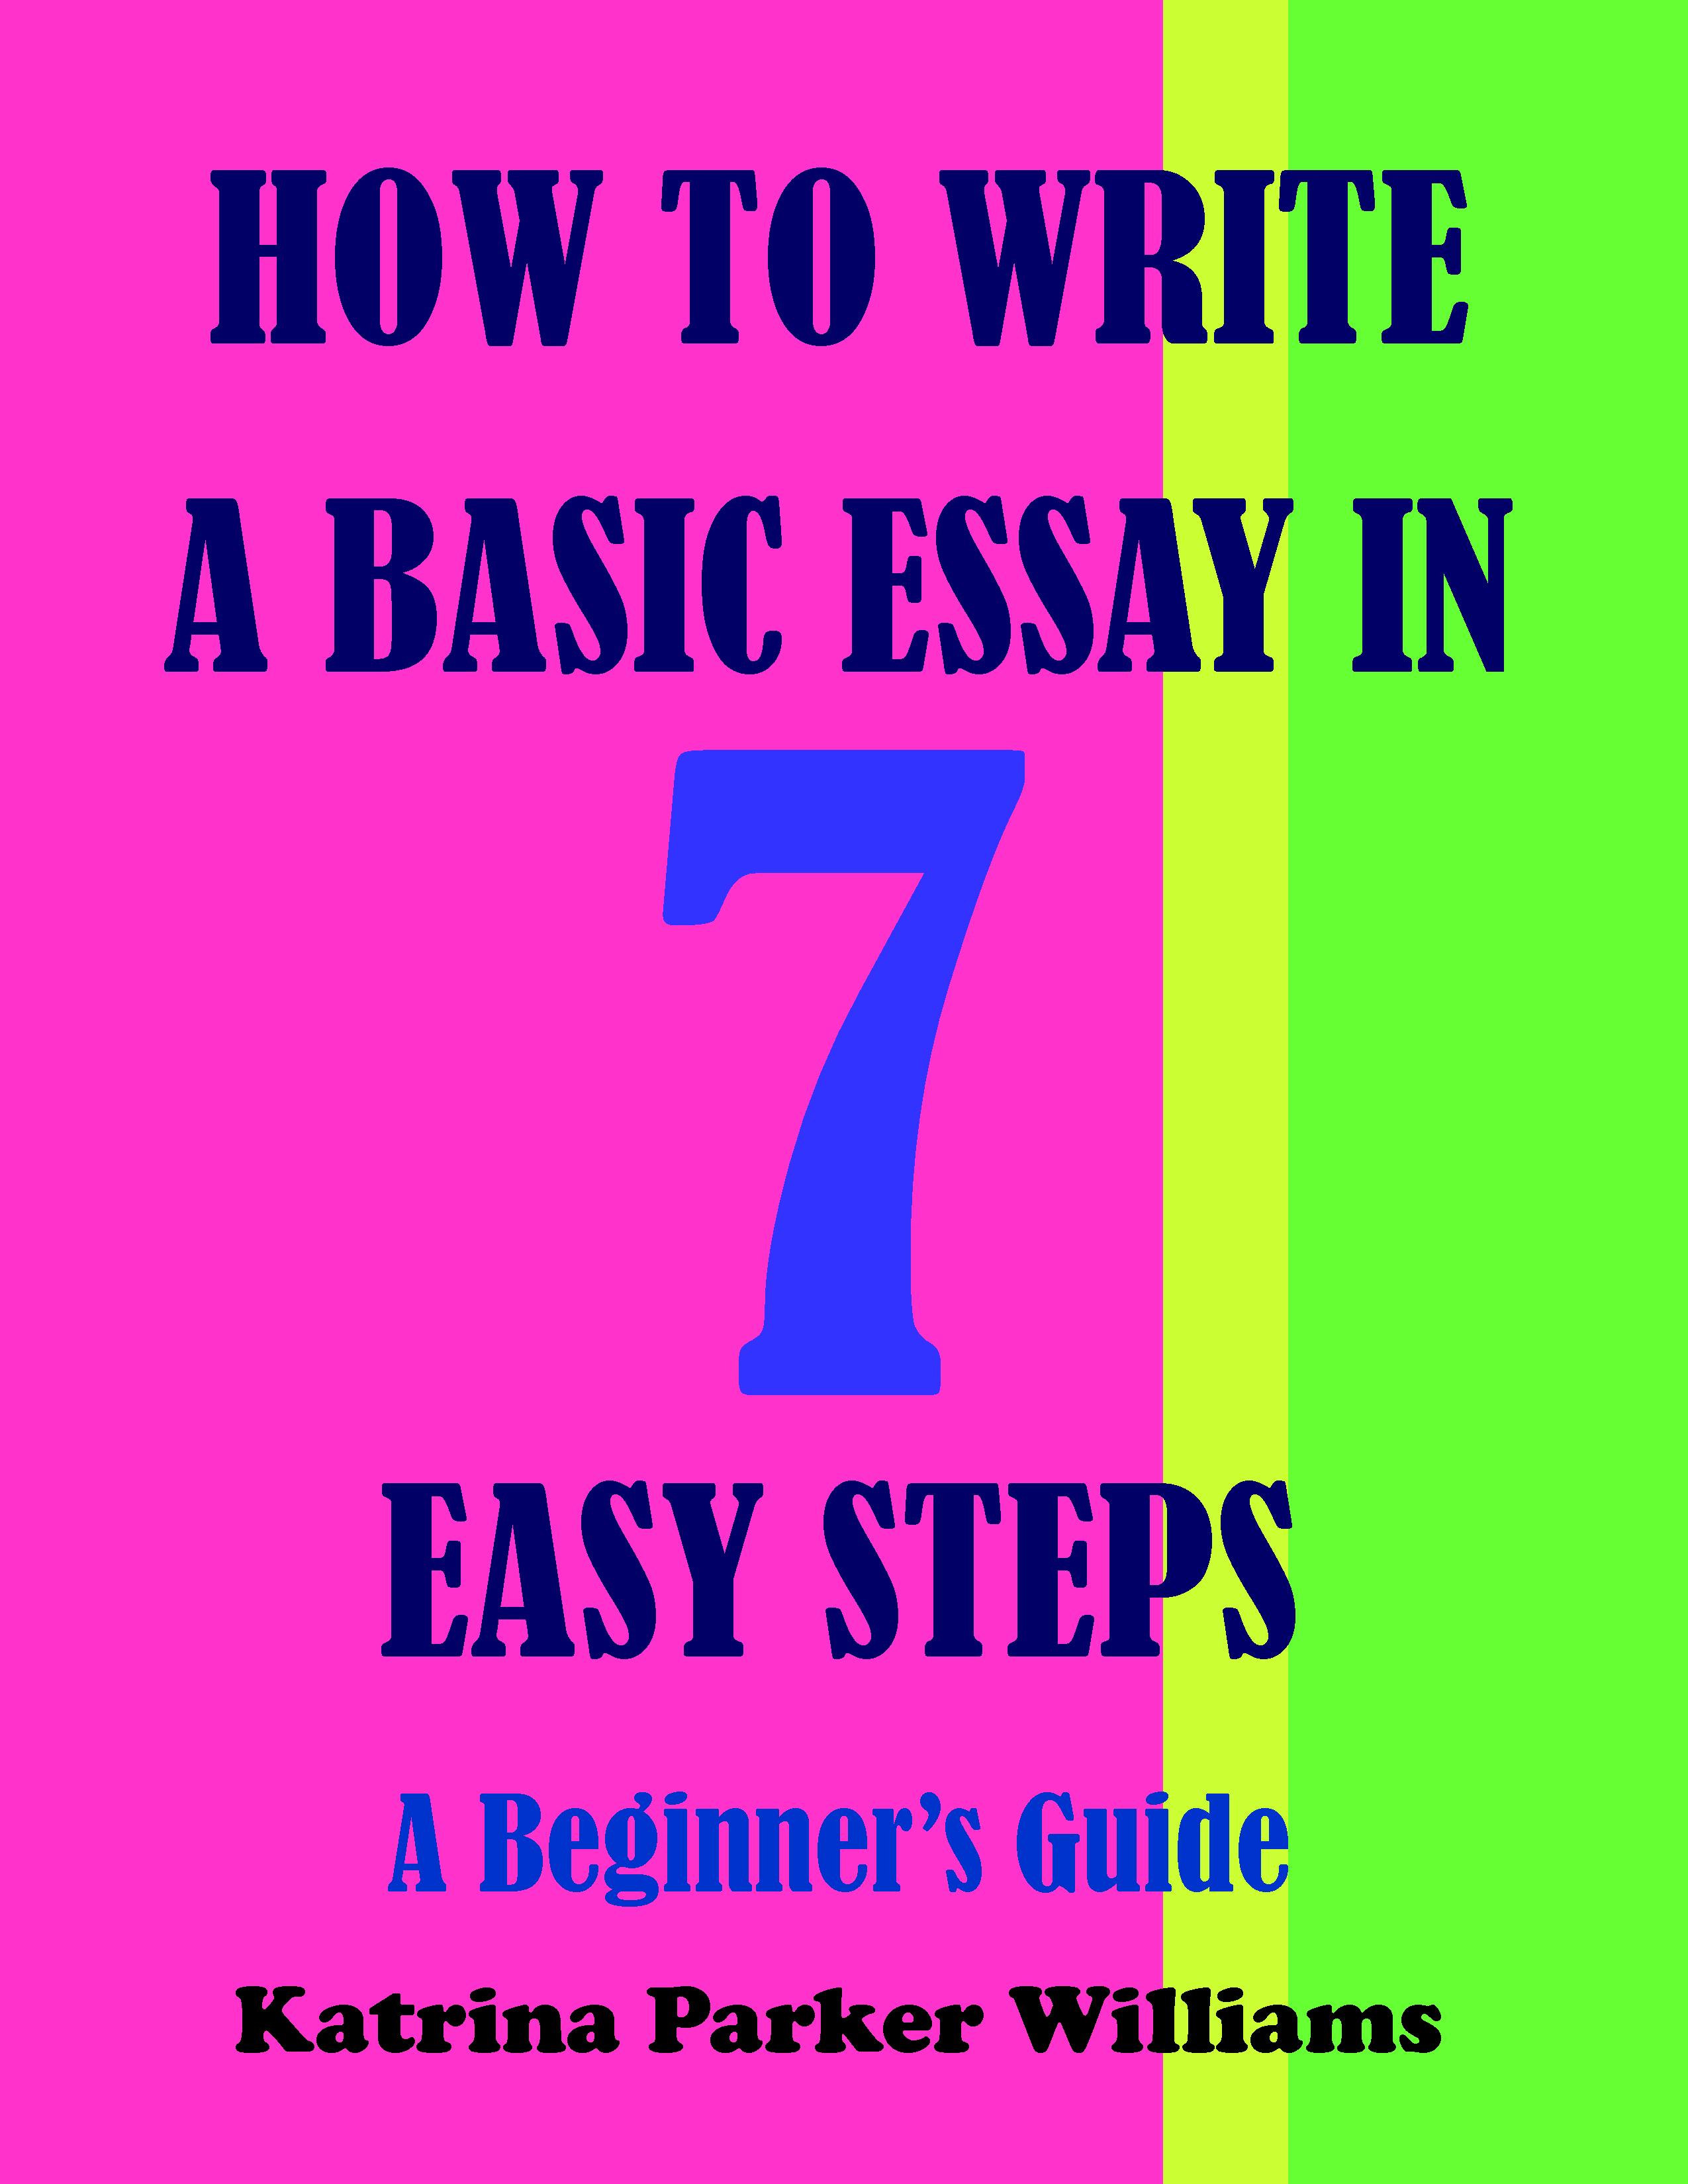 how to write an essay step by step instructions